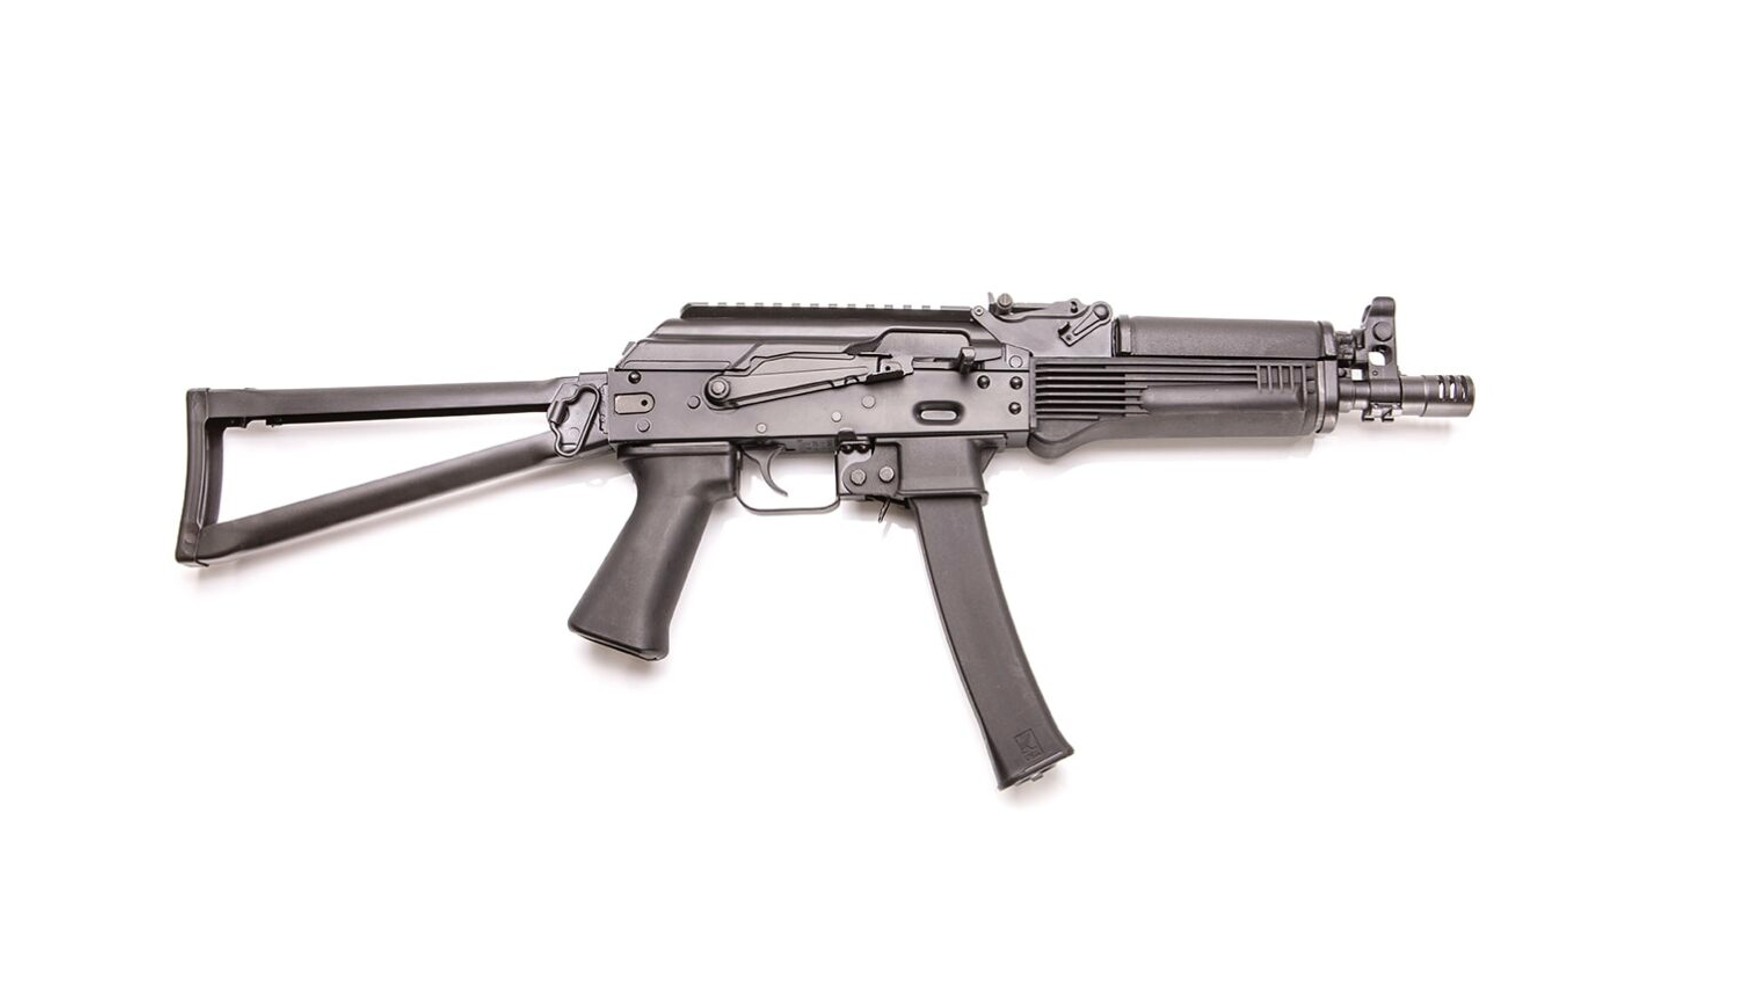 Figure 5: KP-9 SBR model most closely approximates the original Russian Vityaz but it is also available in a pistol and 16" carbine configuration. Source: Kalashnikov USA.